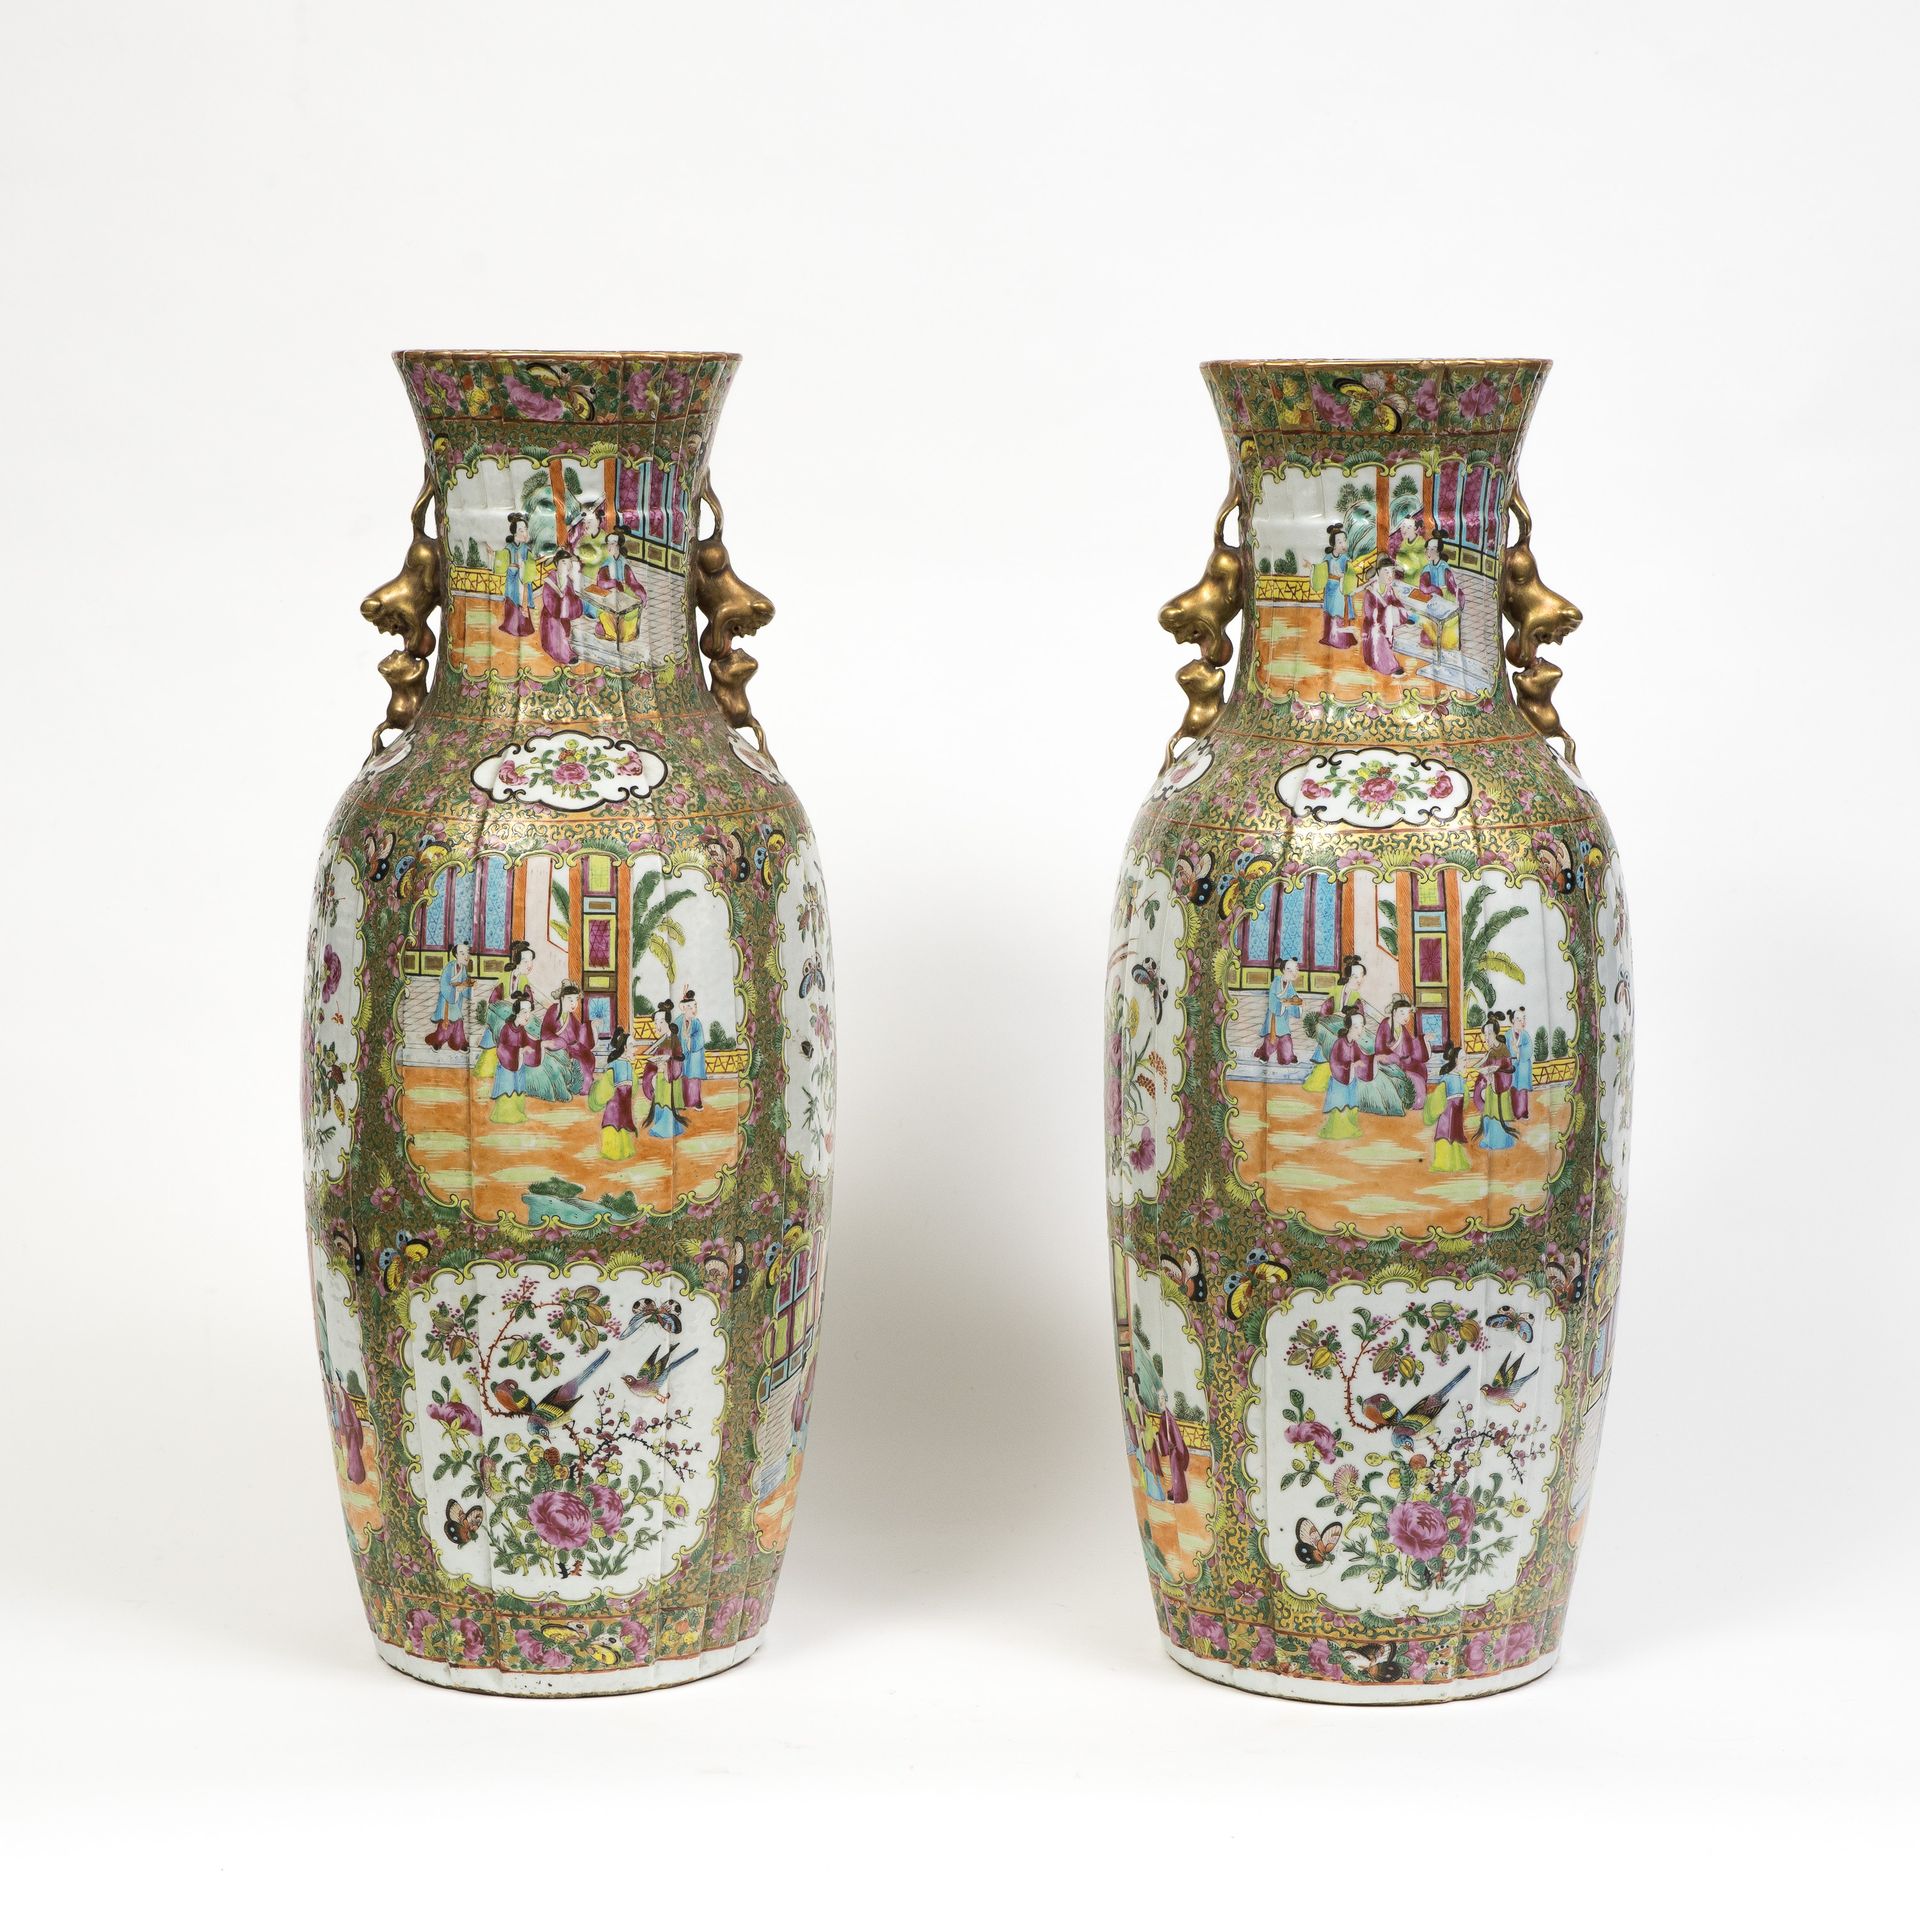 Null Pair of large vases

CHINA, CANTON - 19TH CENTURY

Porcelain, body resemble&hellip;